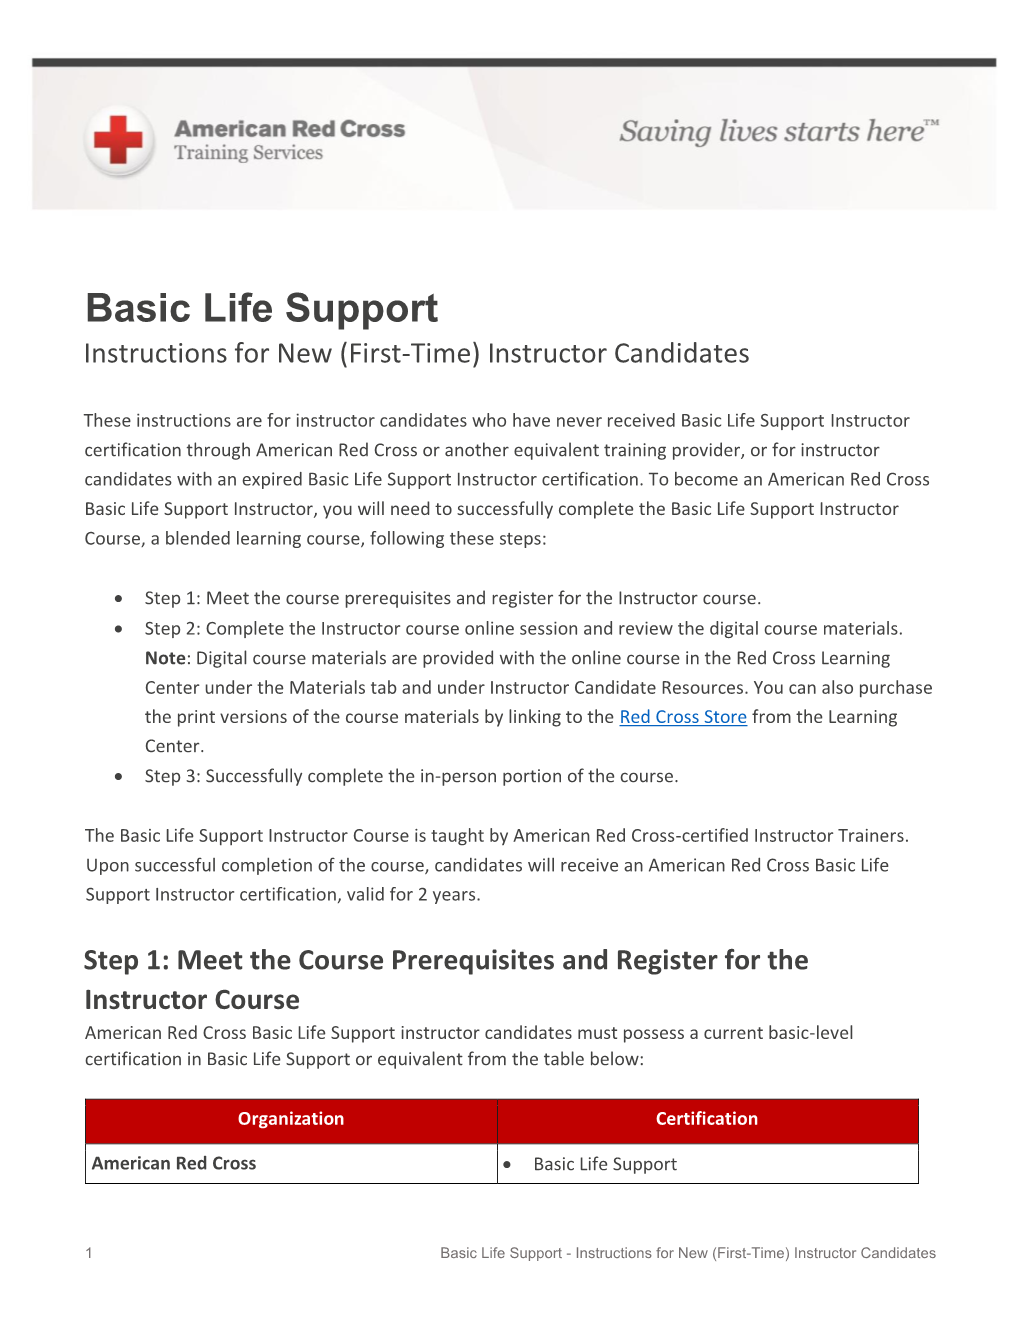 Basic Life Support Instructions for New (First-Time) Instructor Candidates